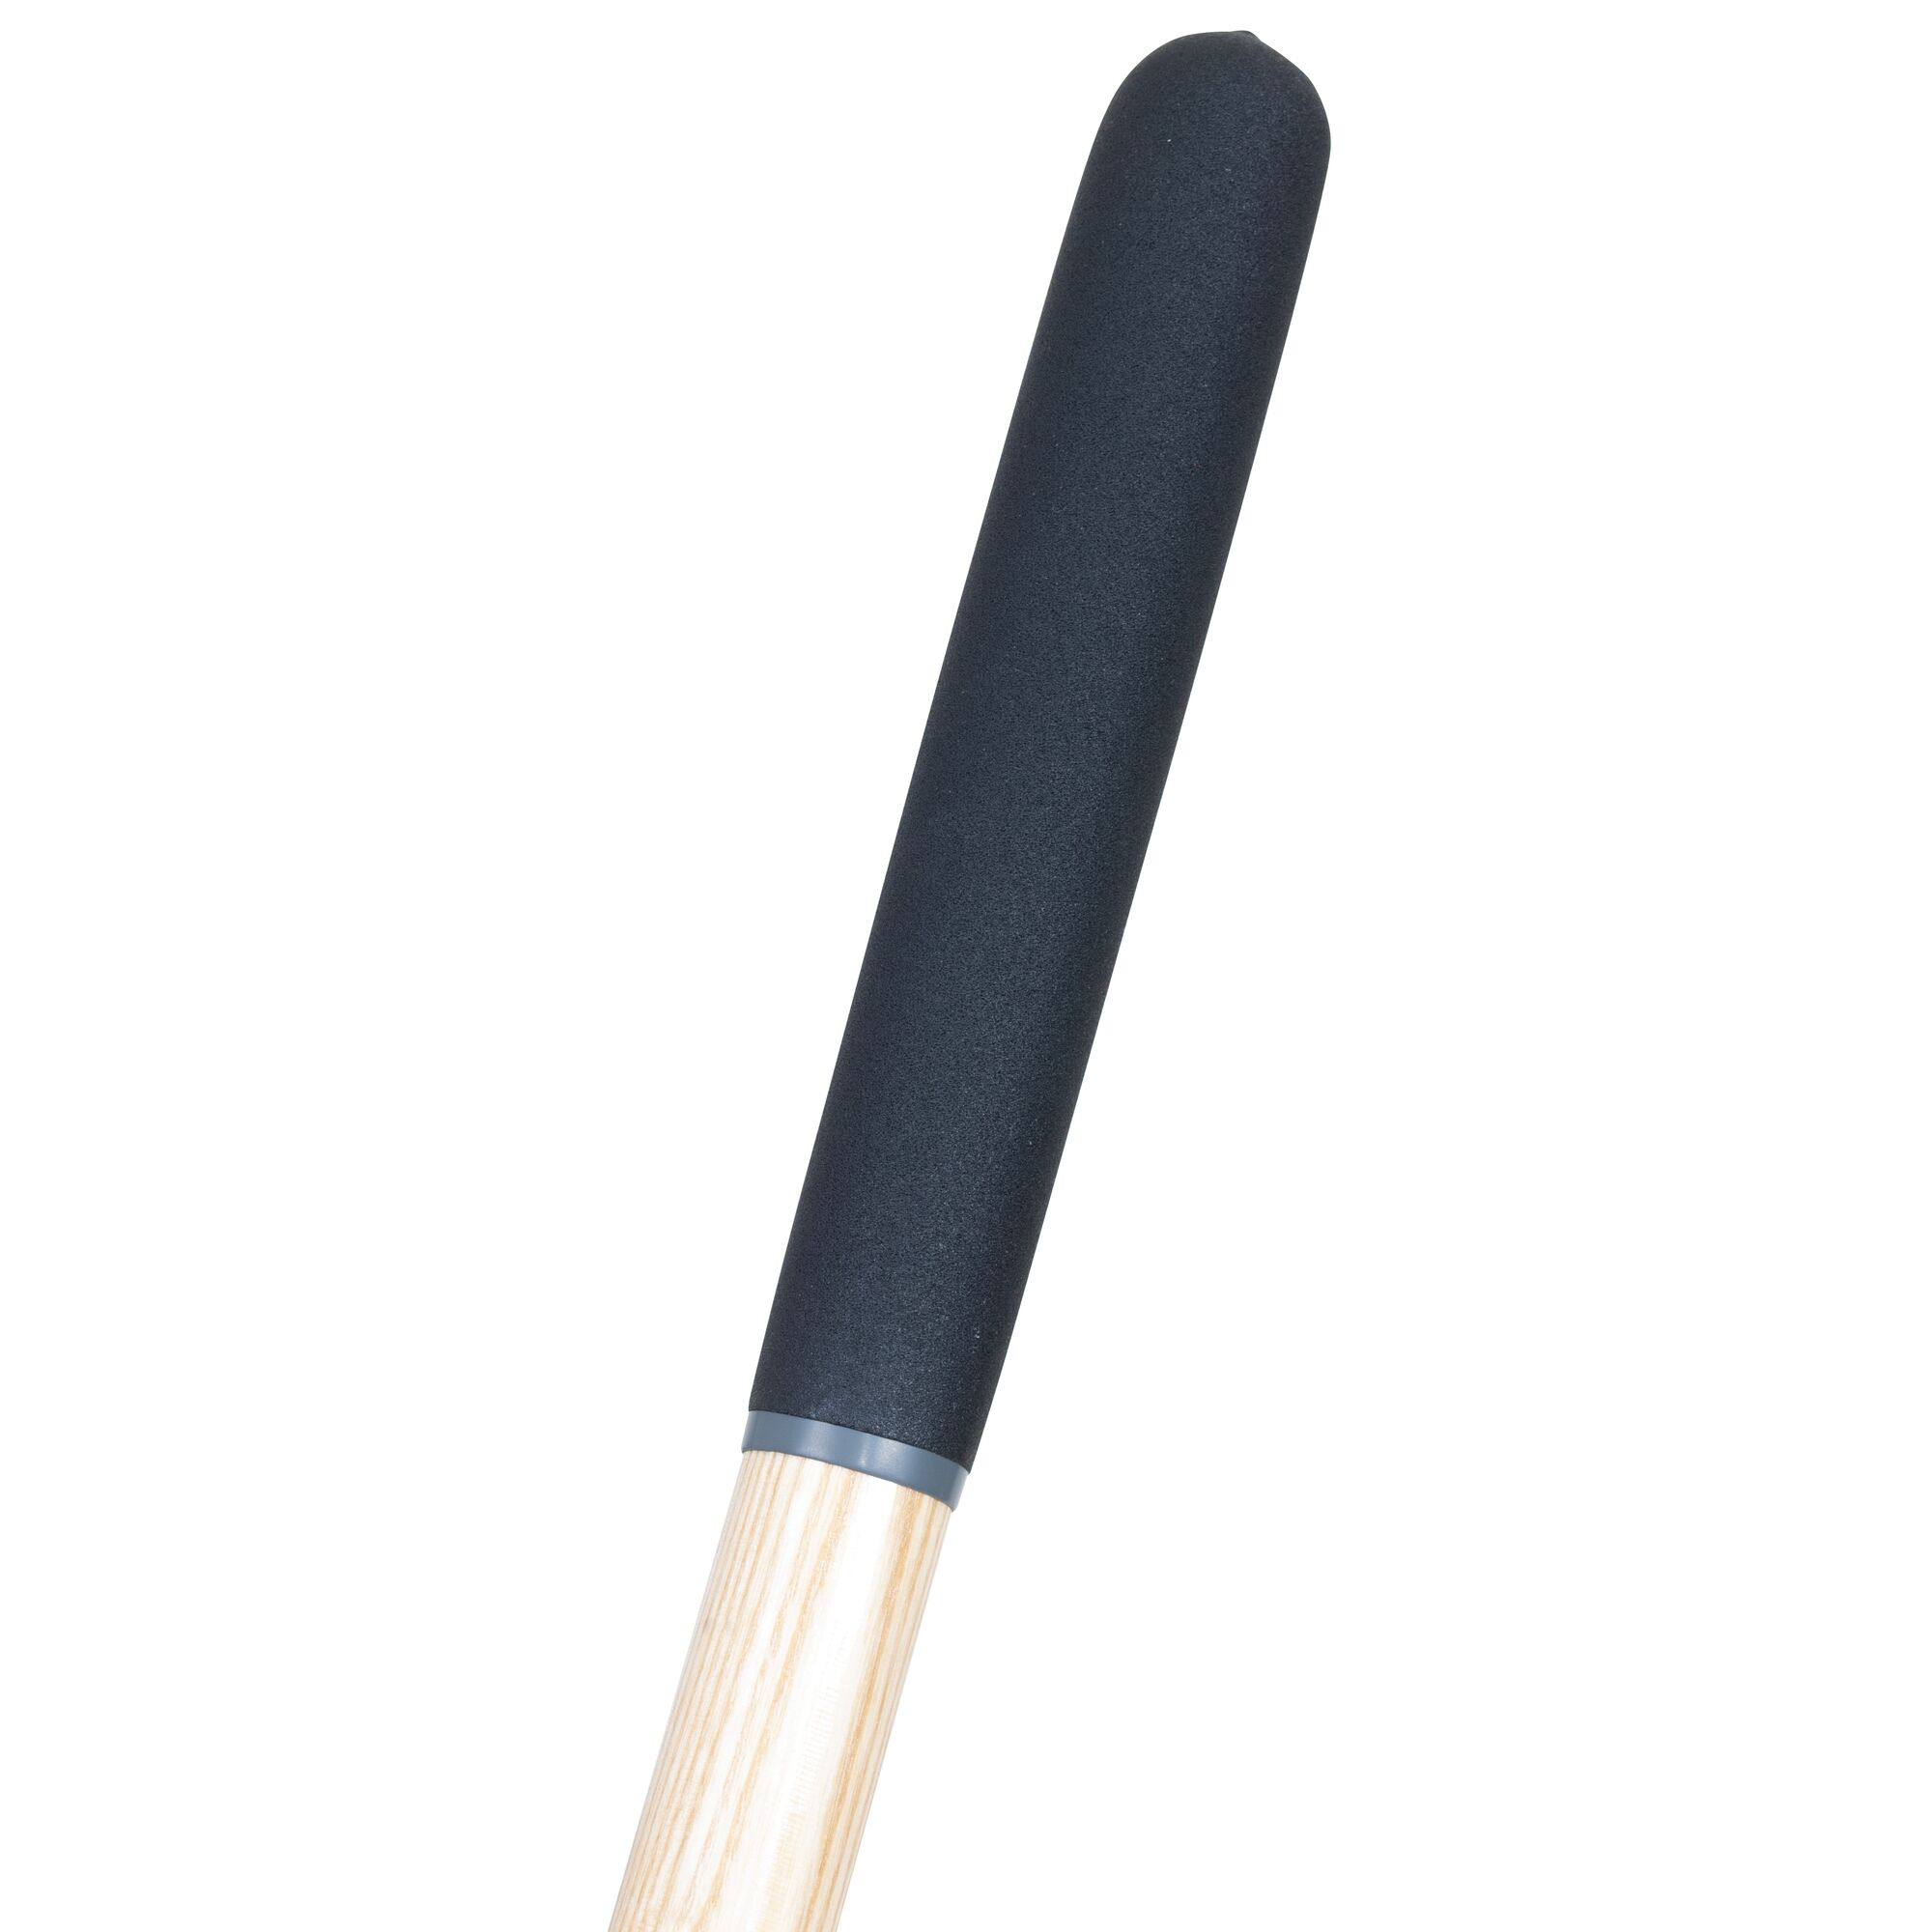 Comfortable grip feature of a 16 inch wood handle drain spade.